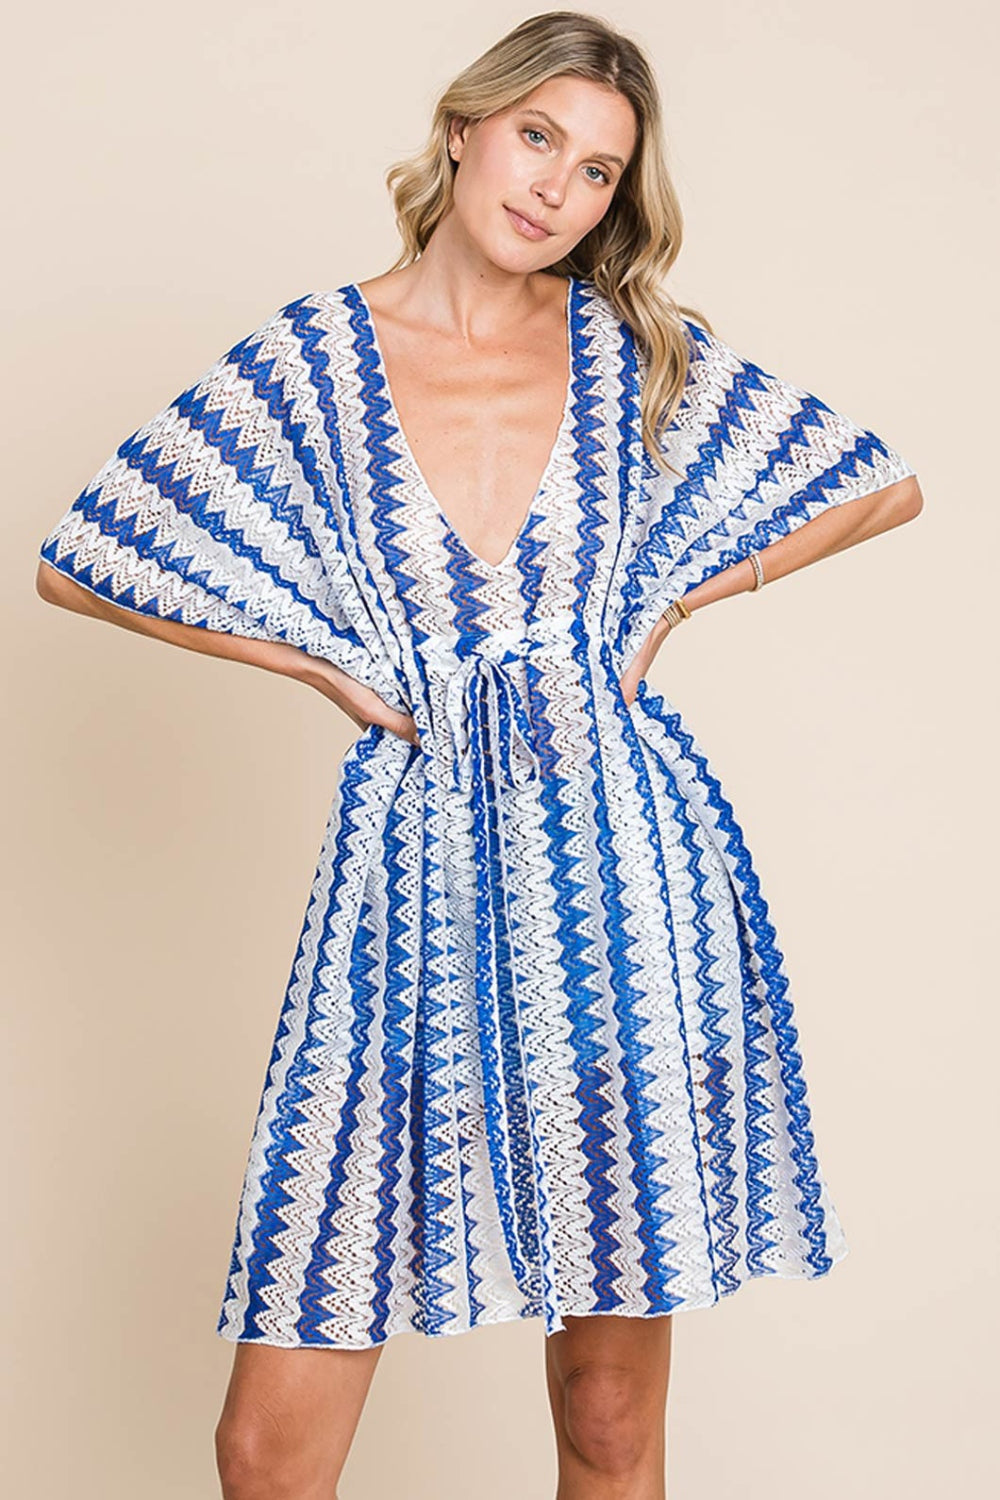 Sunset Vacation  Cotton Bleu by Nu Lab Tied Striped Plunge Half Sleeve Beach Cover Up Sunset and Swim Royal Blue S 